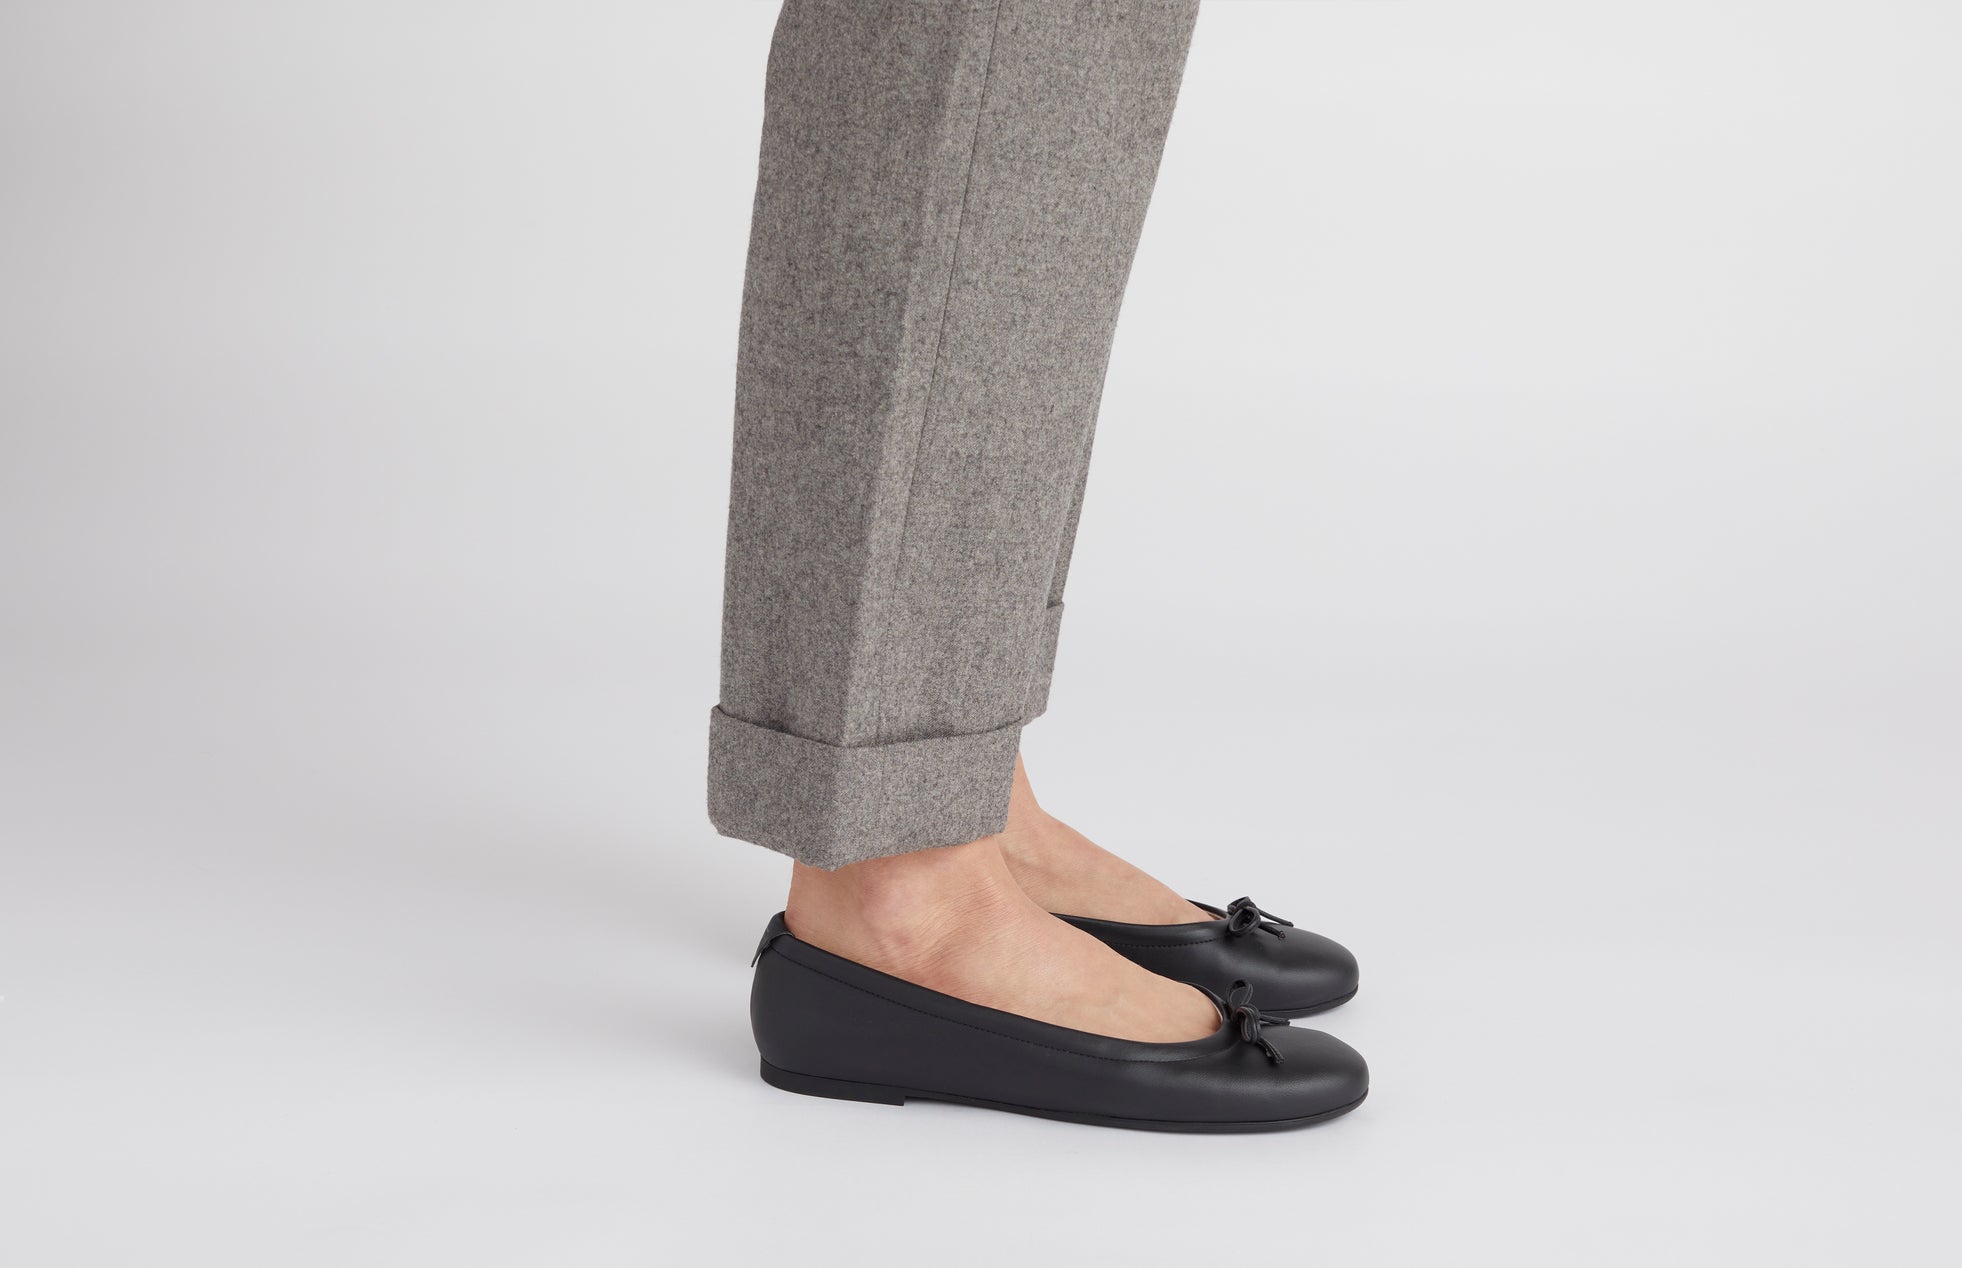 The Ballet Flat in Banbū Leather in Black image 3